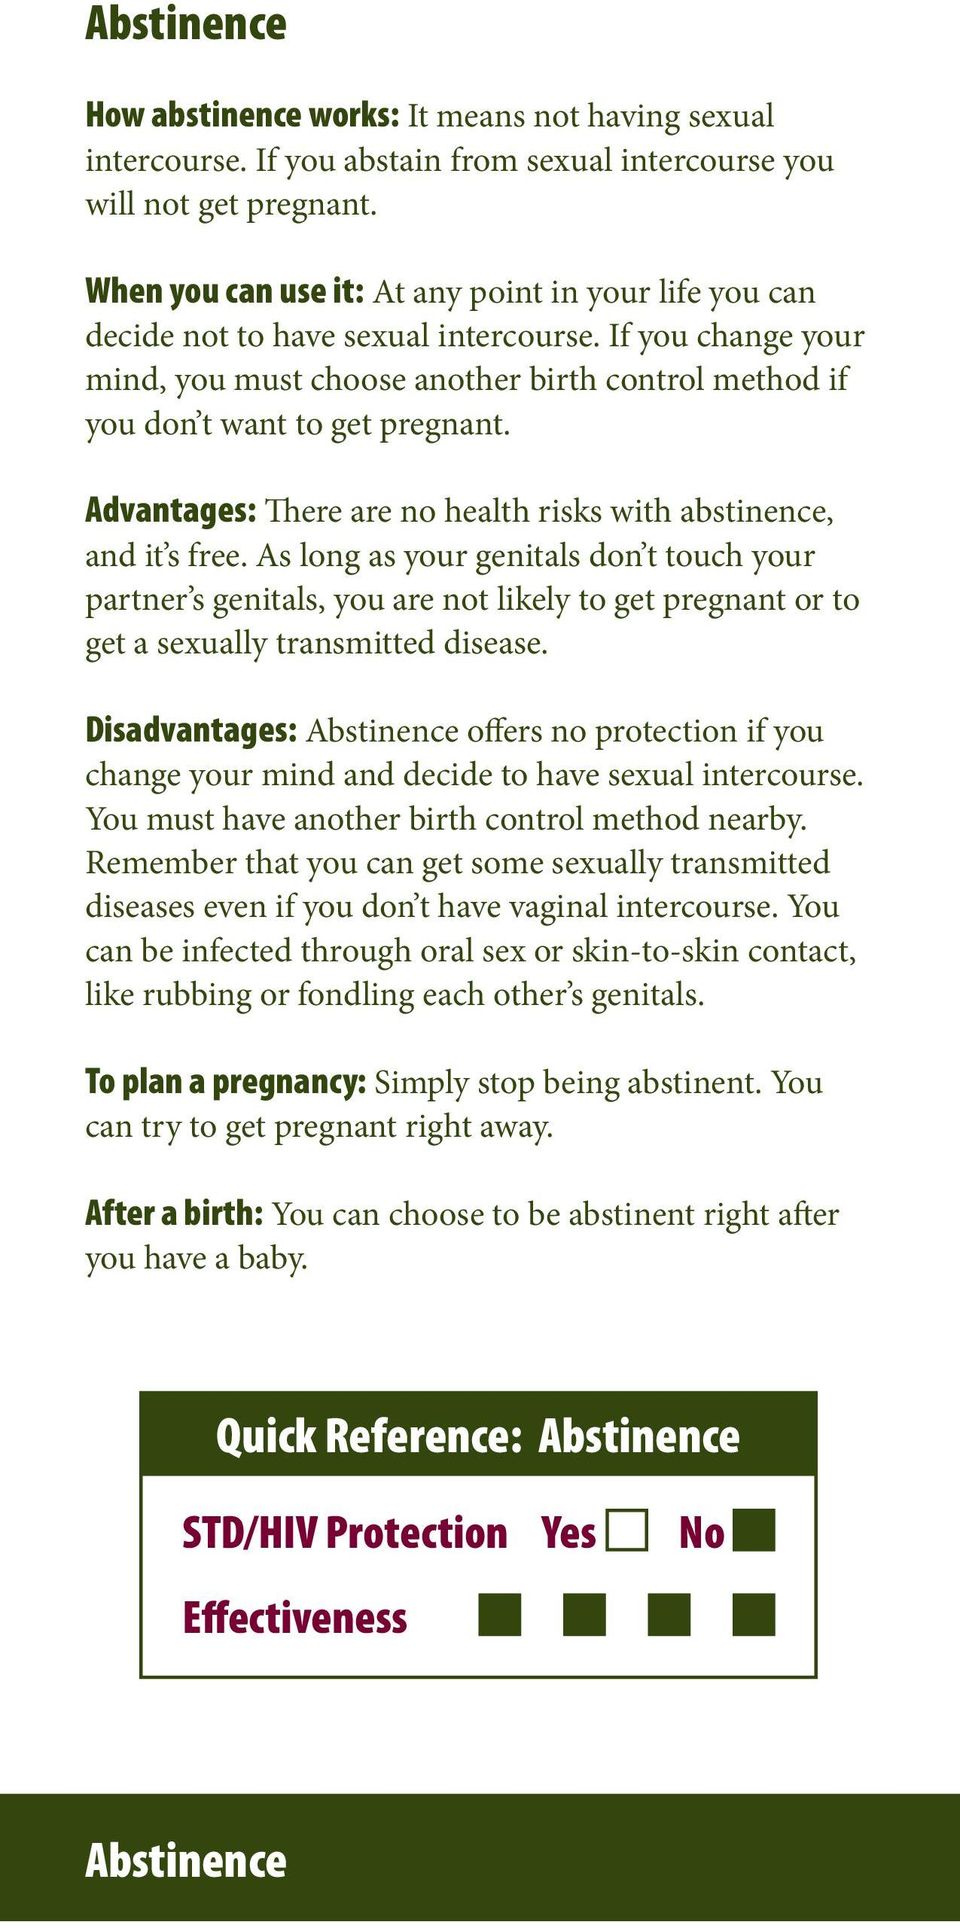 Advantages: There are no health risks with abstinence, and it s free.